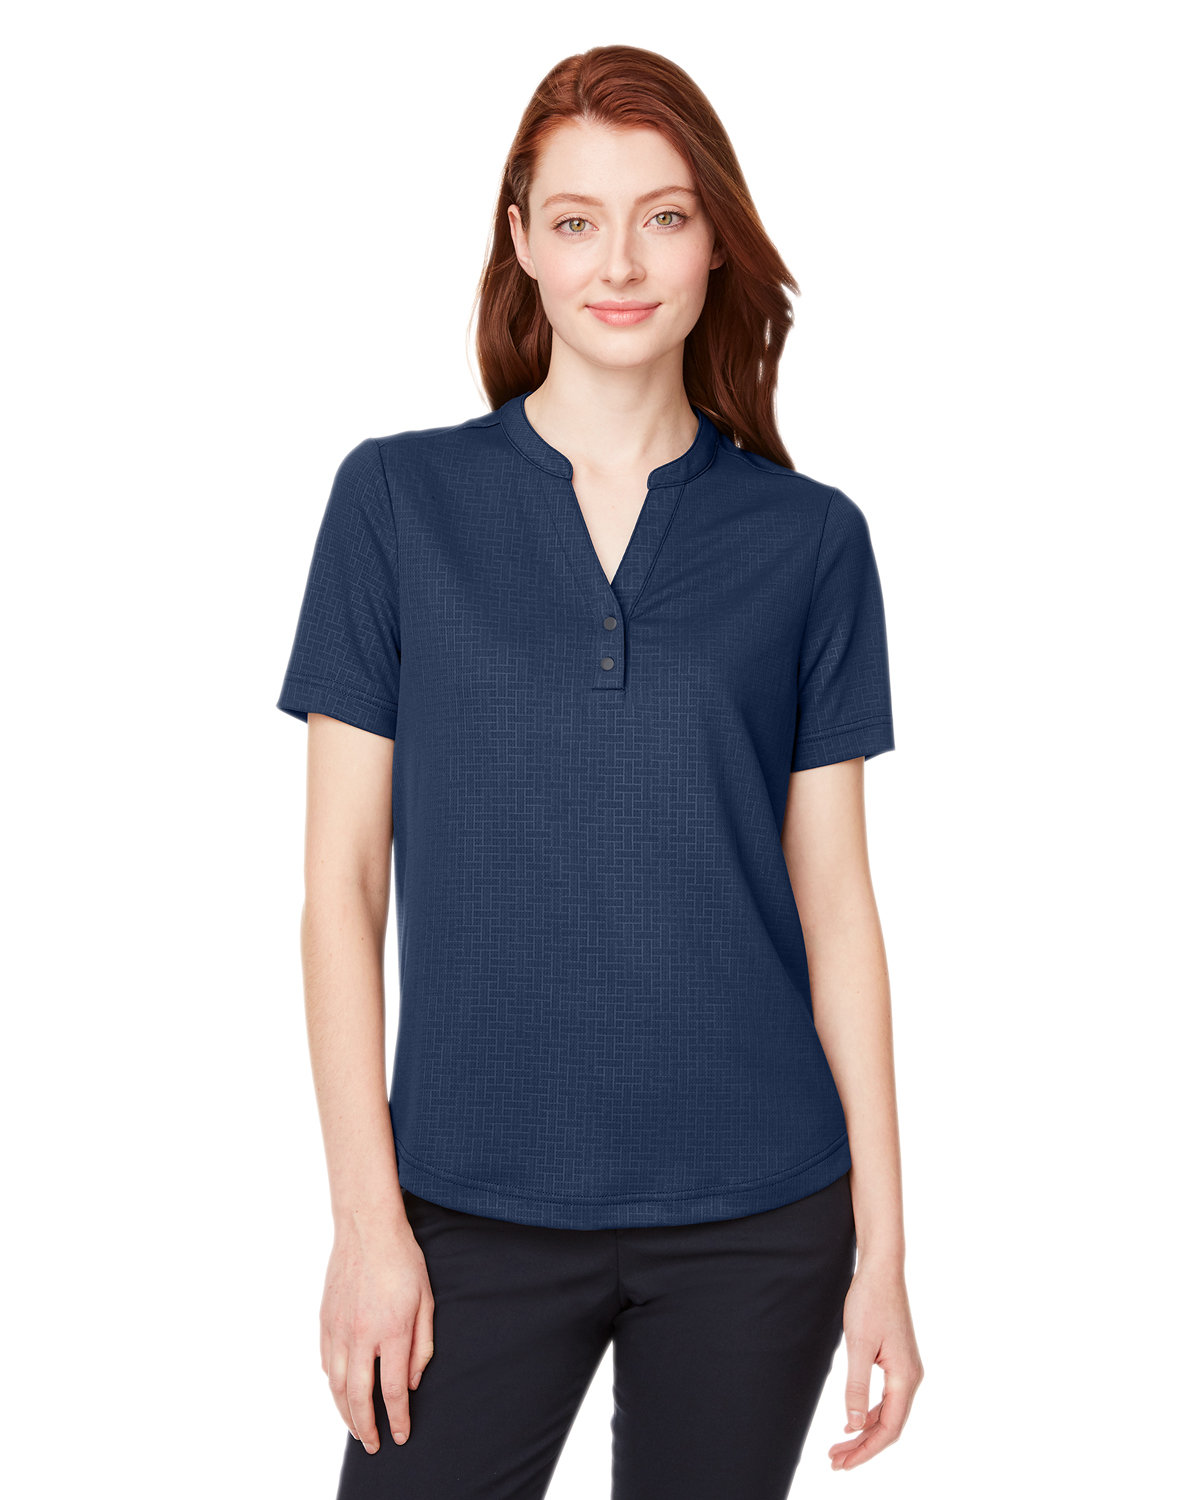 North End Ladies' Replay Recycled Polo classic navy 